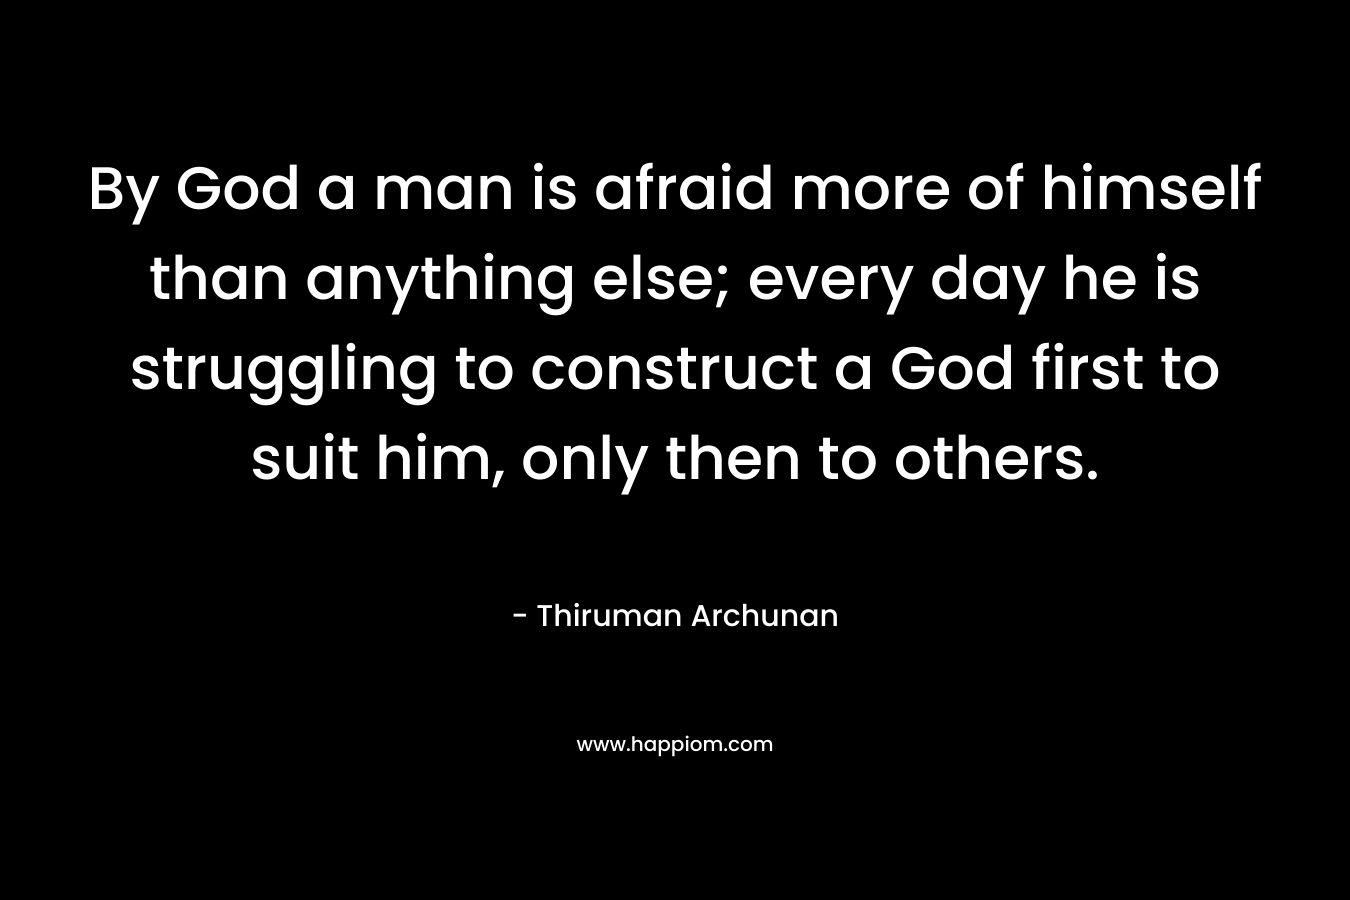 By God a man is afraid more of himself than anything else; every day he is struggling to construct a God first to suit him, only then to others. – Thiruman Archunan